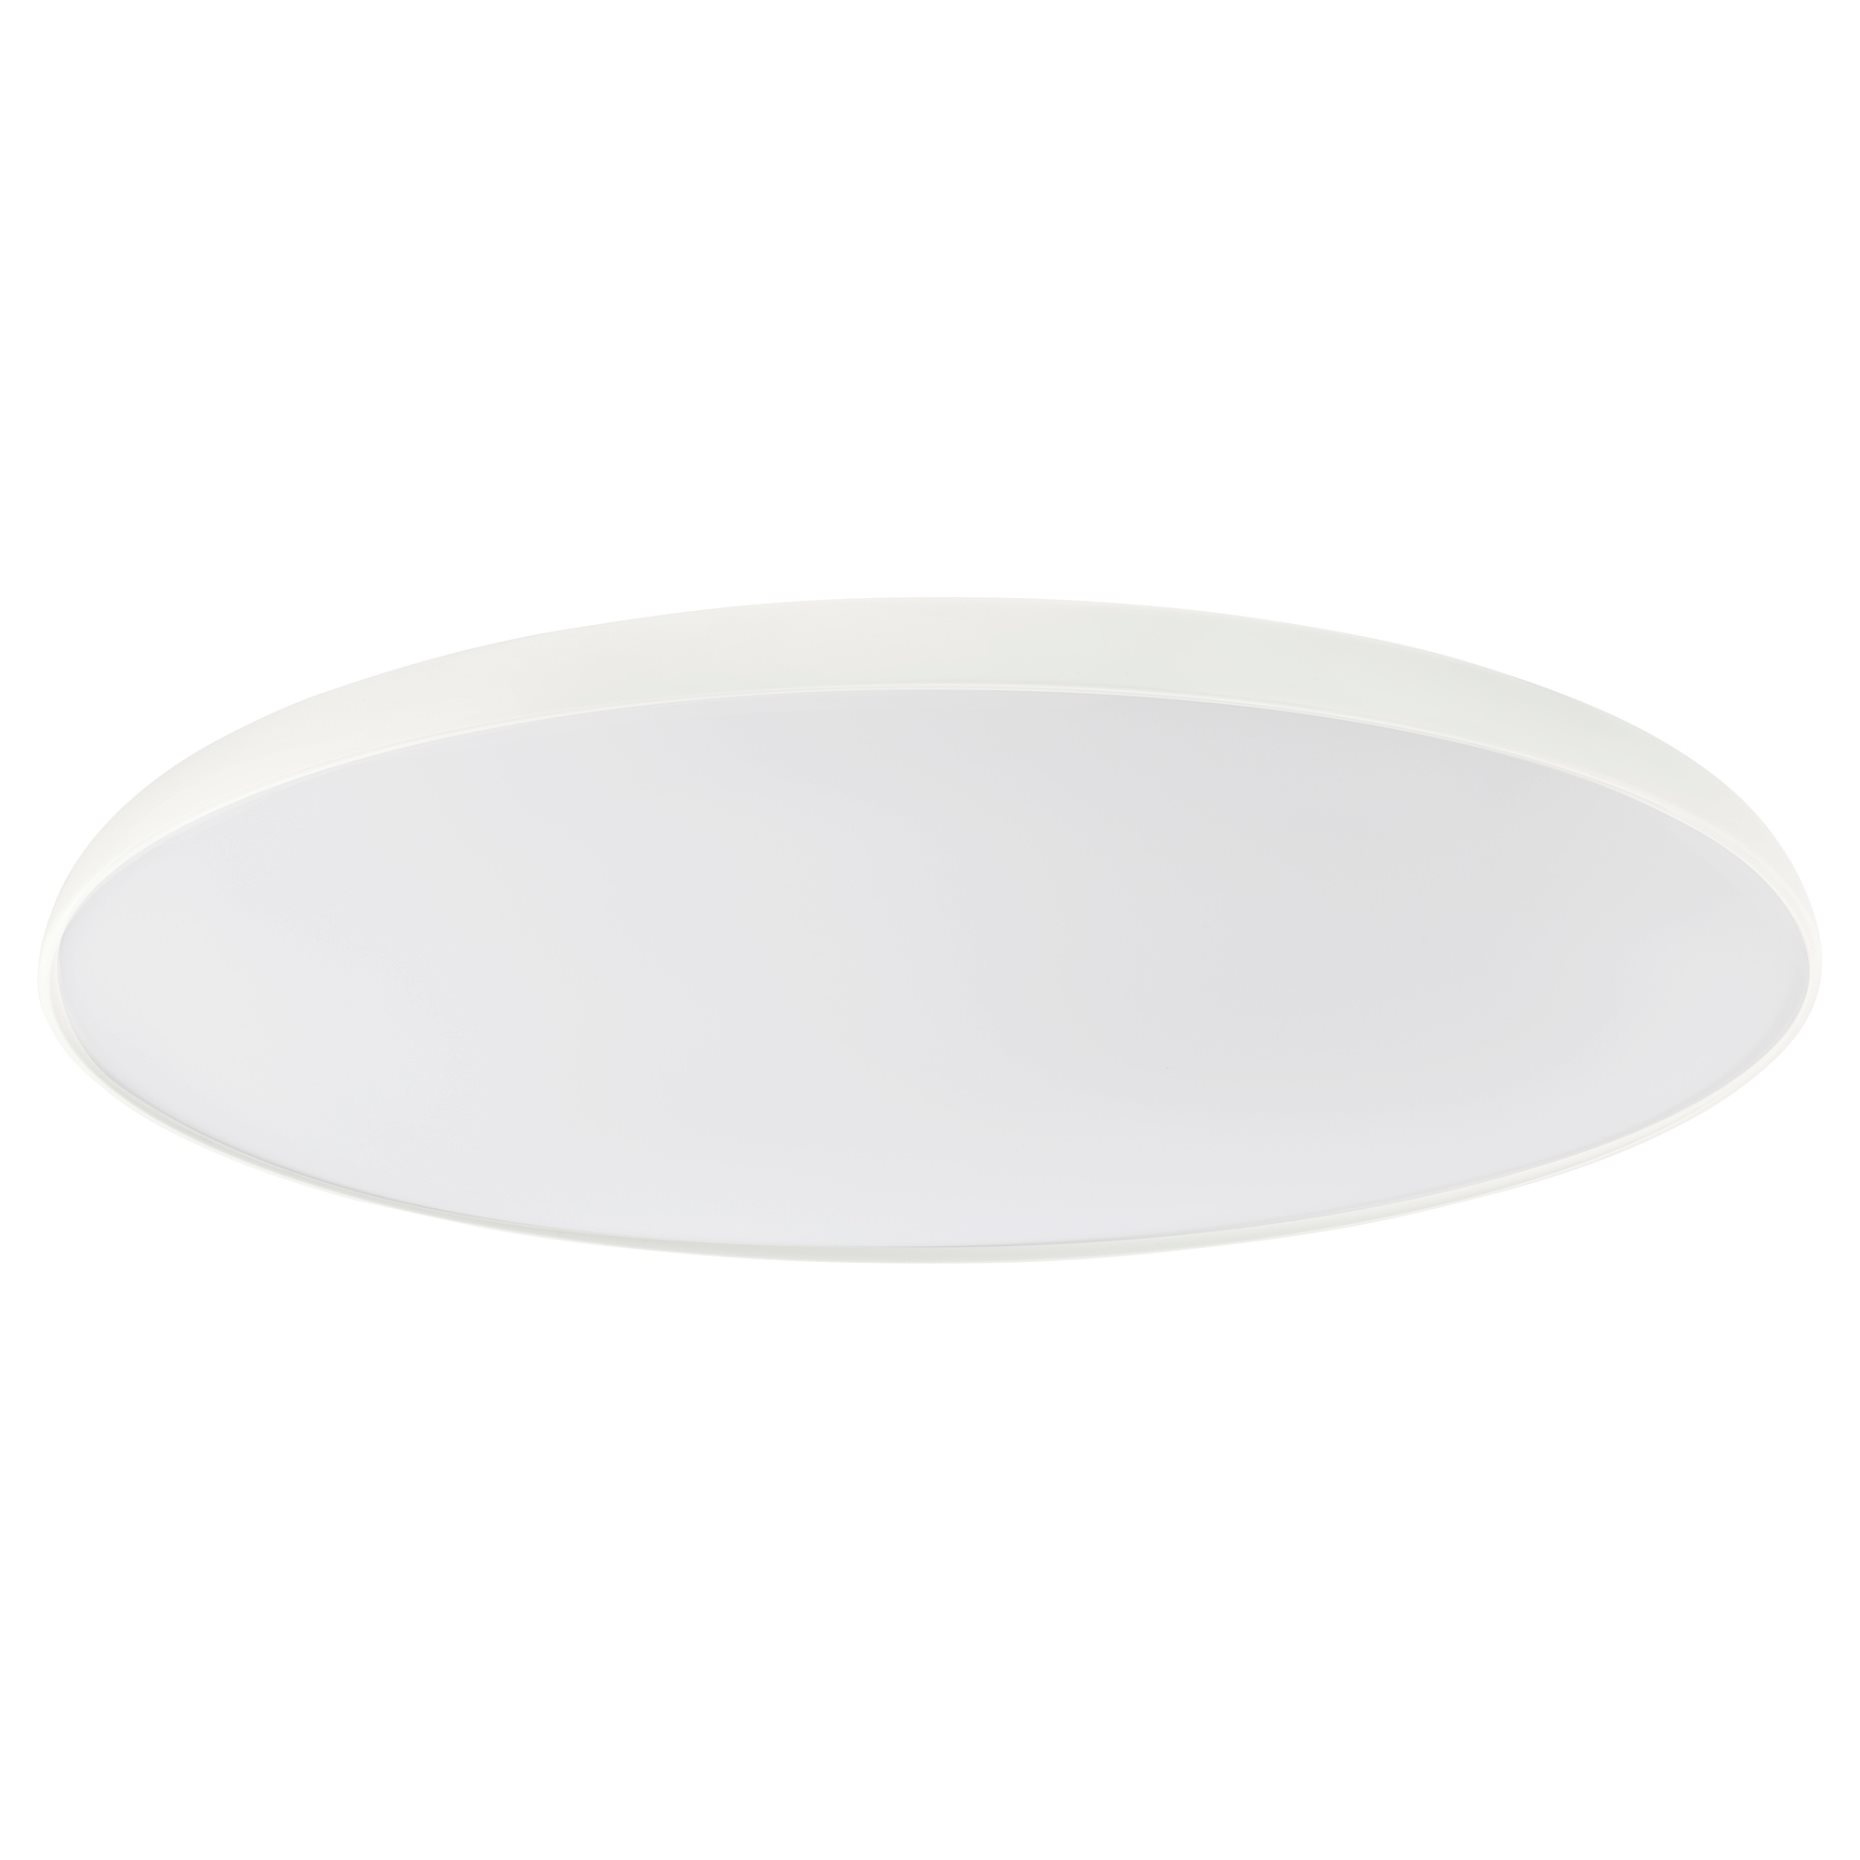 NYMÅNE, ceiling lamp with built-in LED light source, 45 cm, 605.260.47